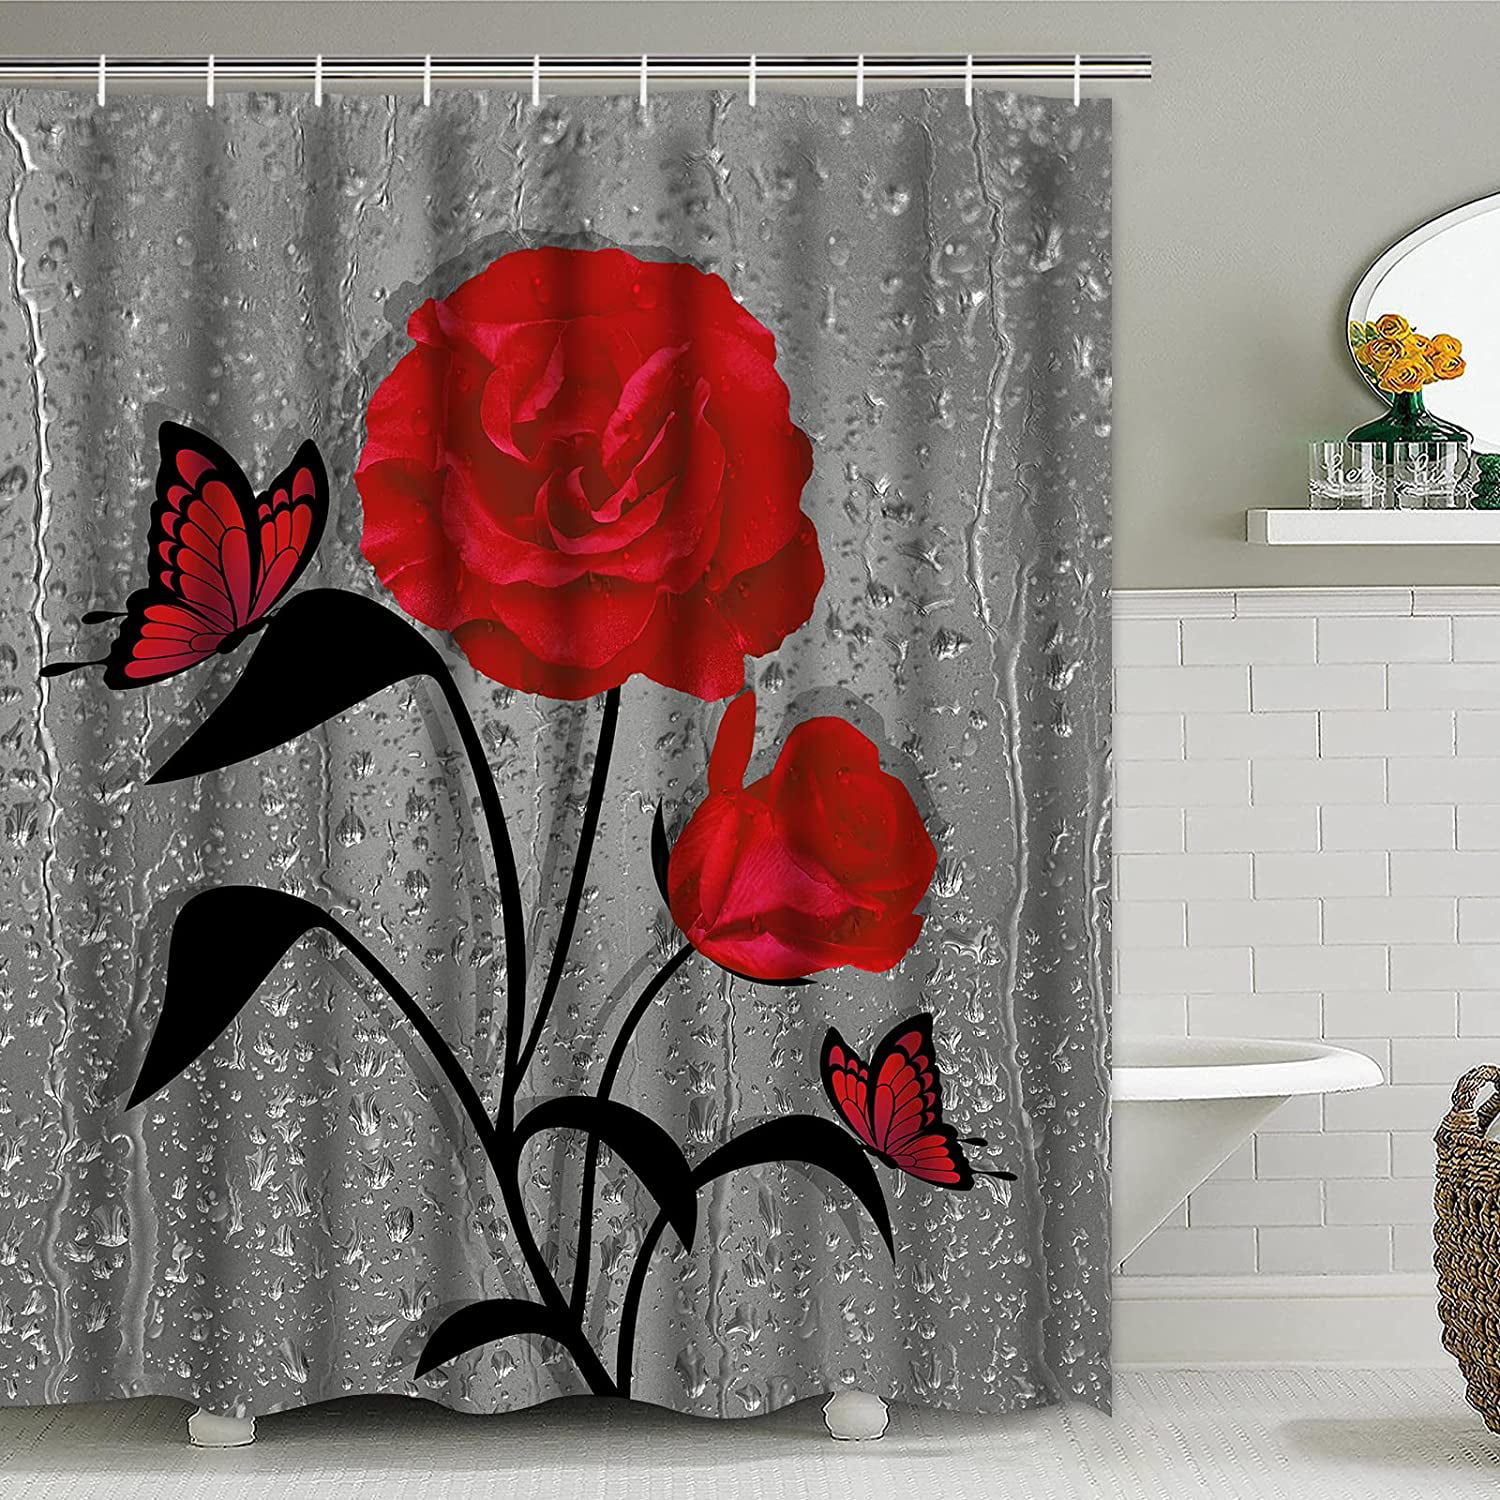 Details about   Sheet Music and Red Rose Shower Curtain Bathroom Decor Fabric 12hooks 71in 